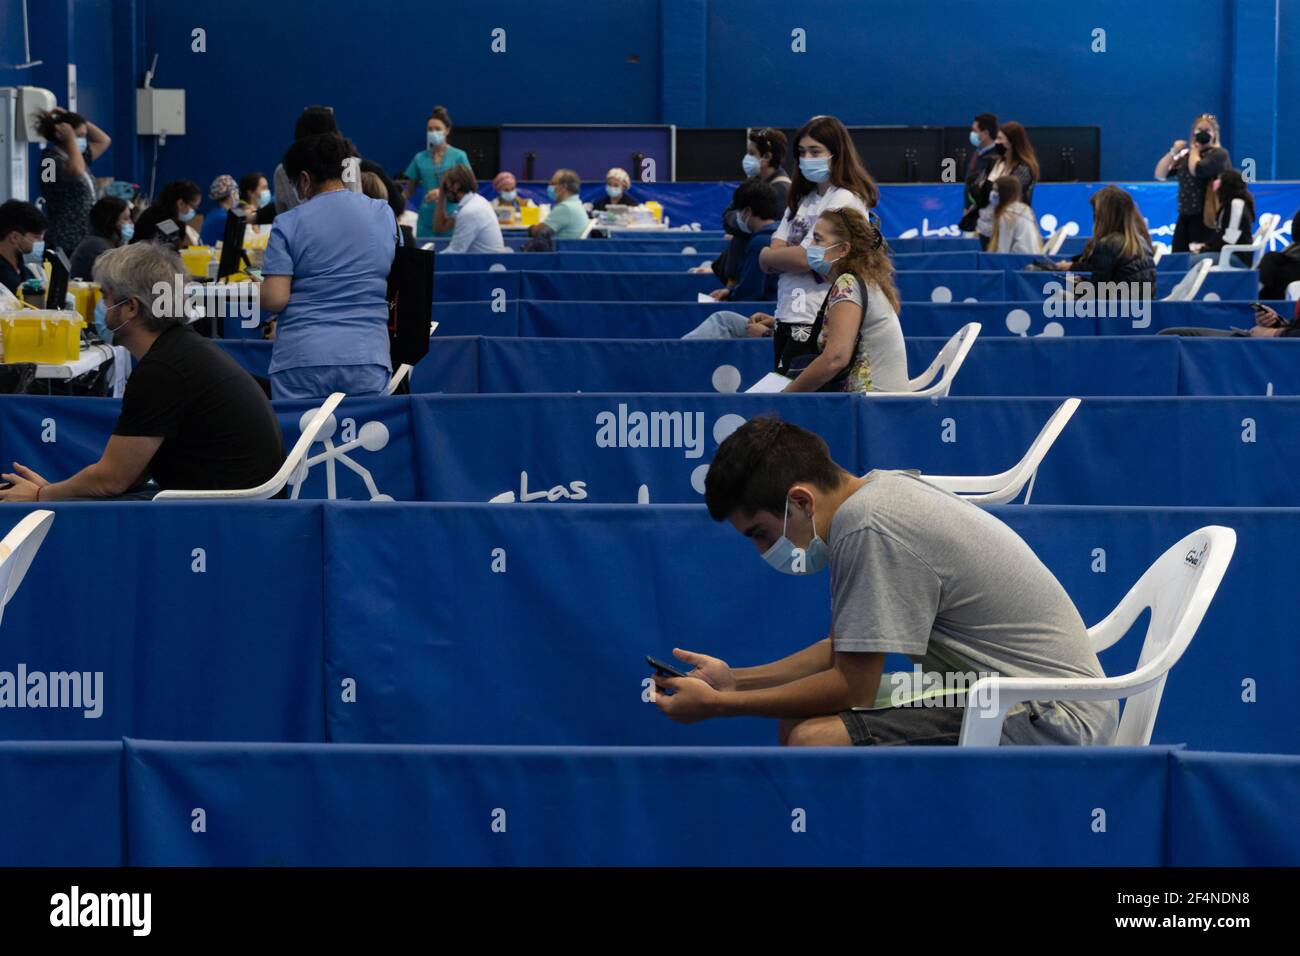 Santiago, Metropolitana, Chile. 22nd Mar, 2021. People wait to receive the dose of the Sinovac or Pfizer vaccine, in a municipal stadium transformed into a vaccination center against covid in Santiago, Chile. Credit: Matias Basualdo/ZUMA Wire/Alamy Live News Stock Photo